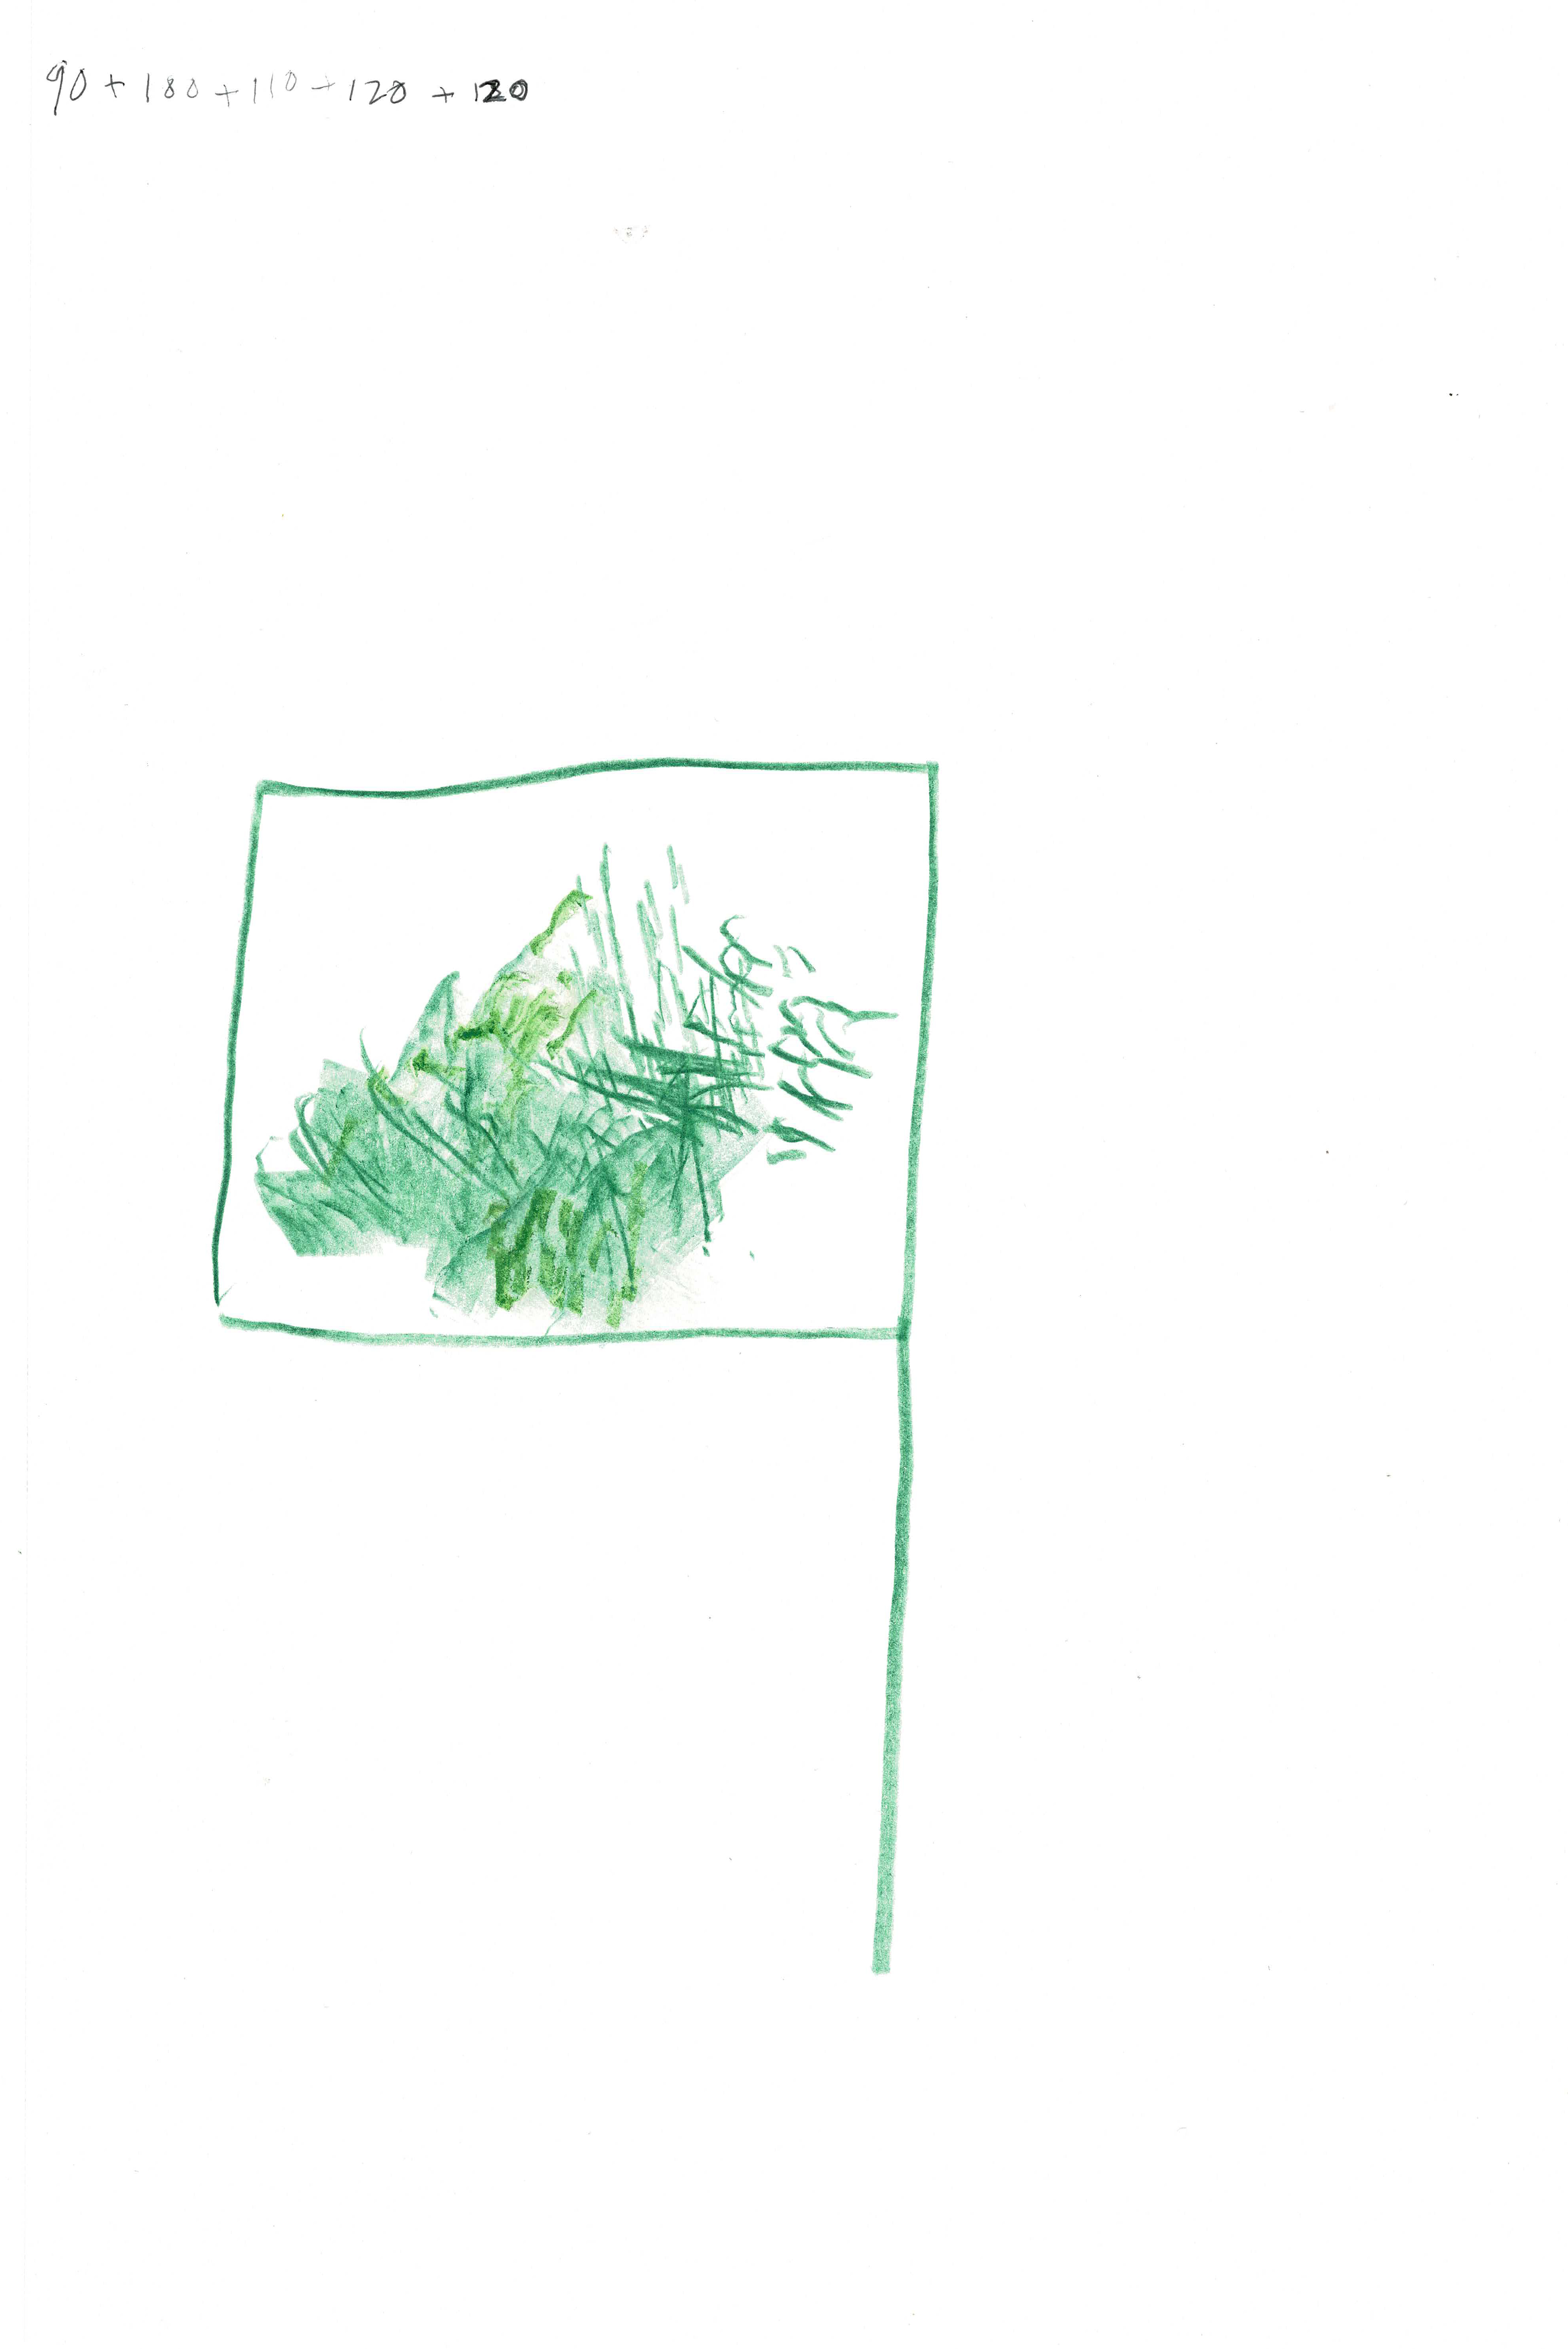 drawing in green of a flag with some vegetation on it